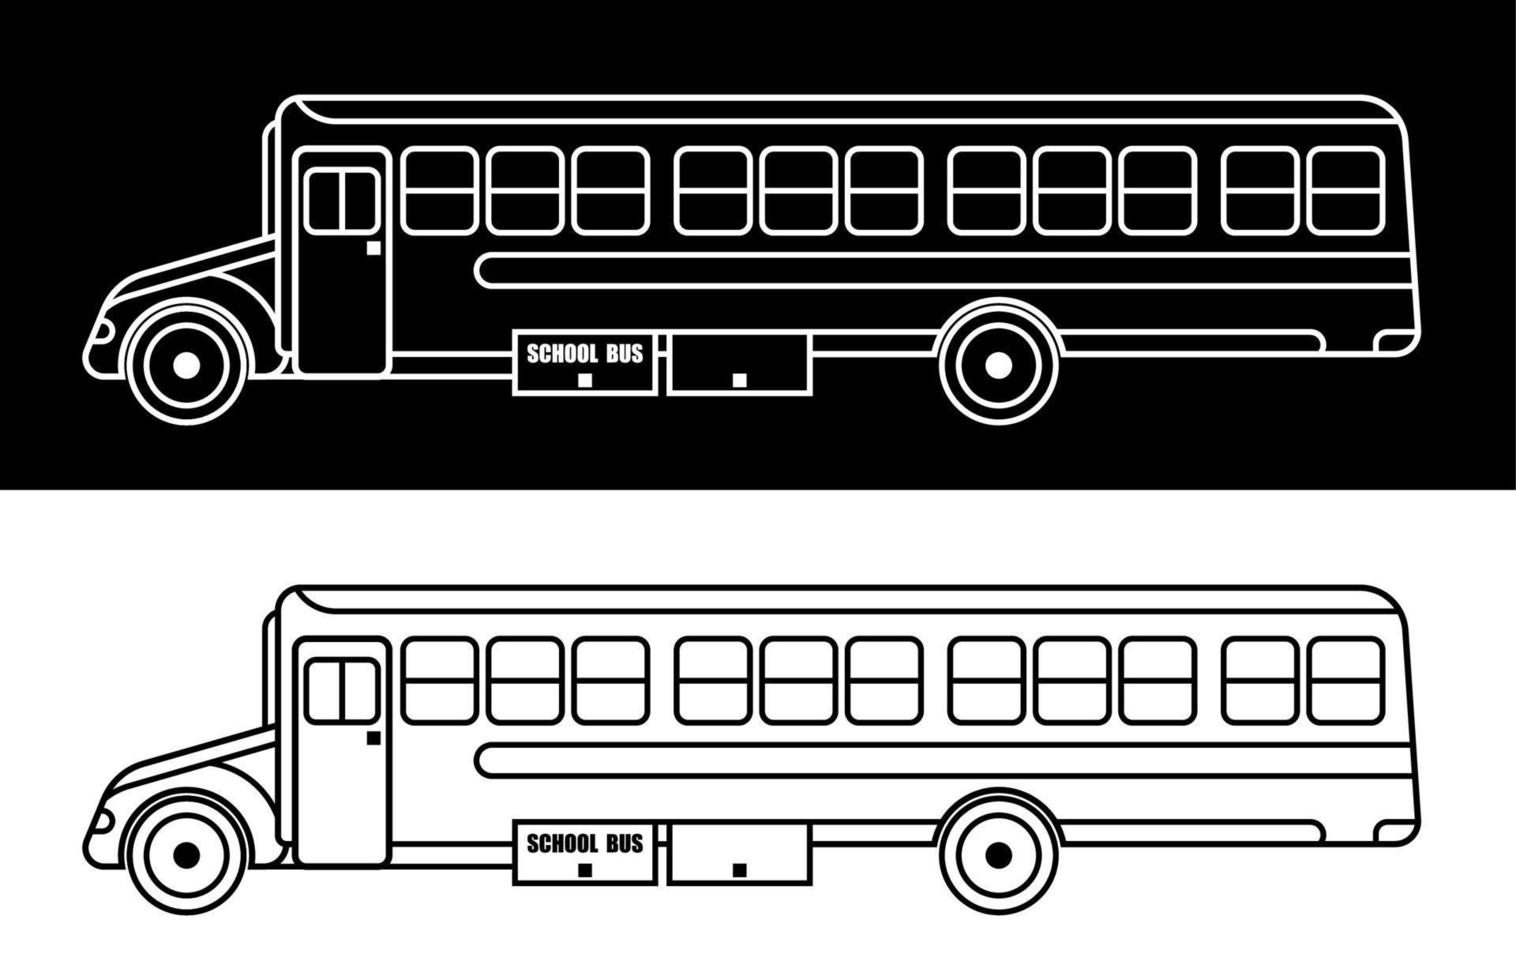 American school bus. September 1 is Beginning of the school year. Linear icon. Black and white vector